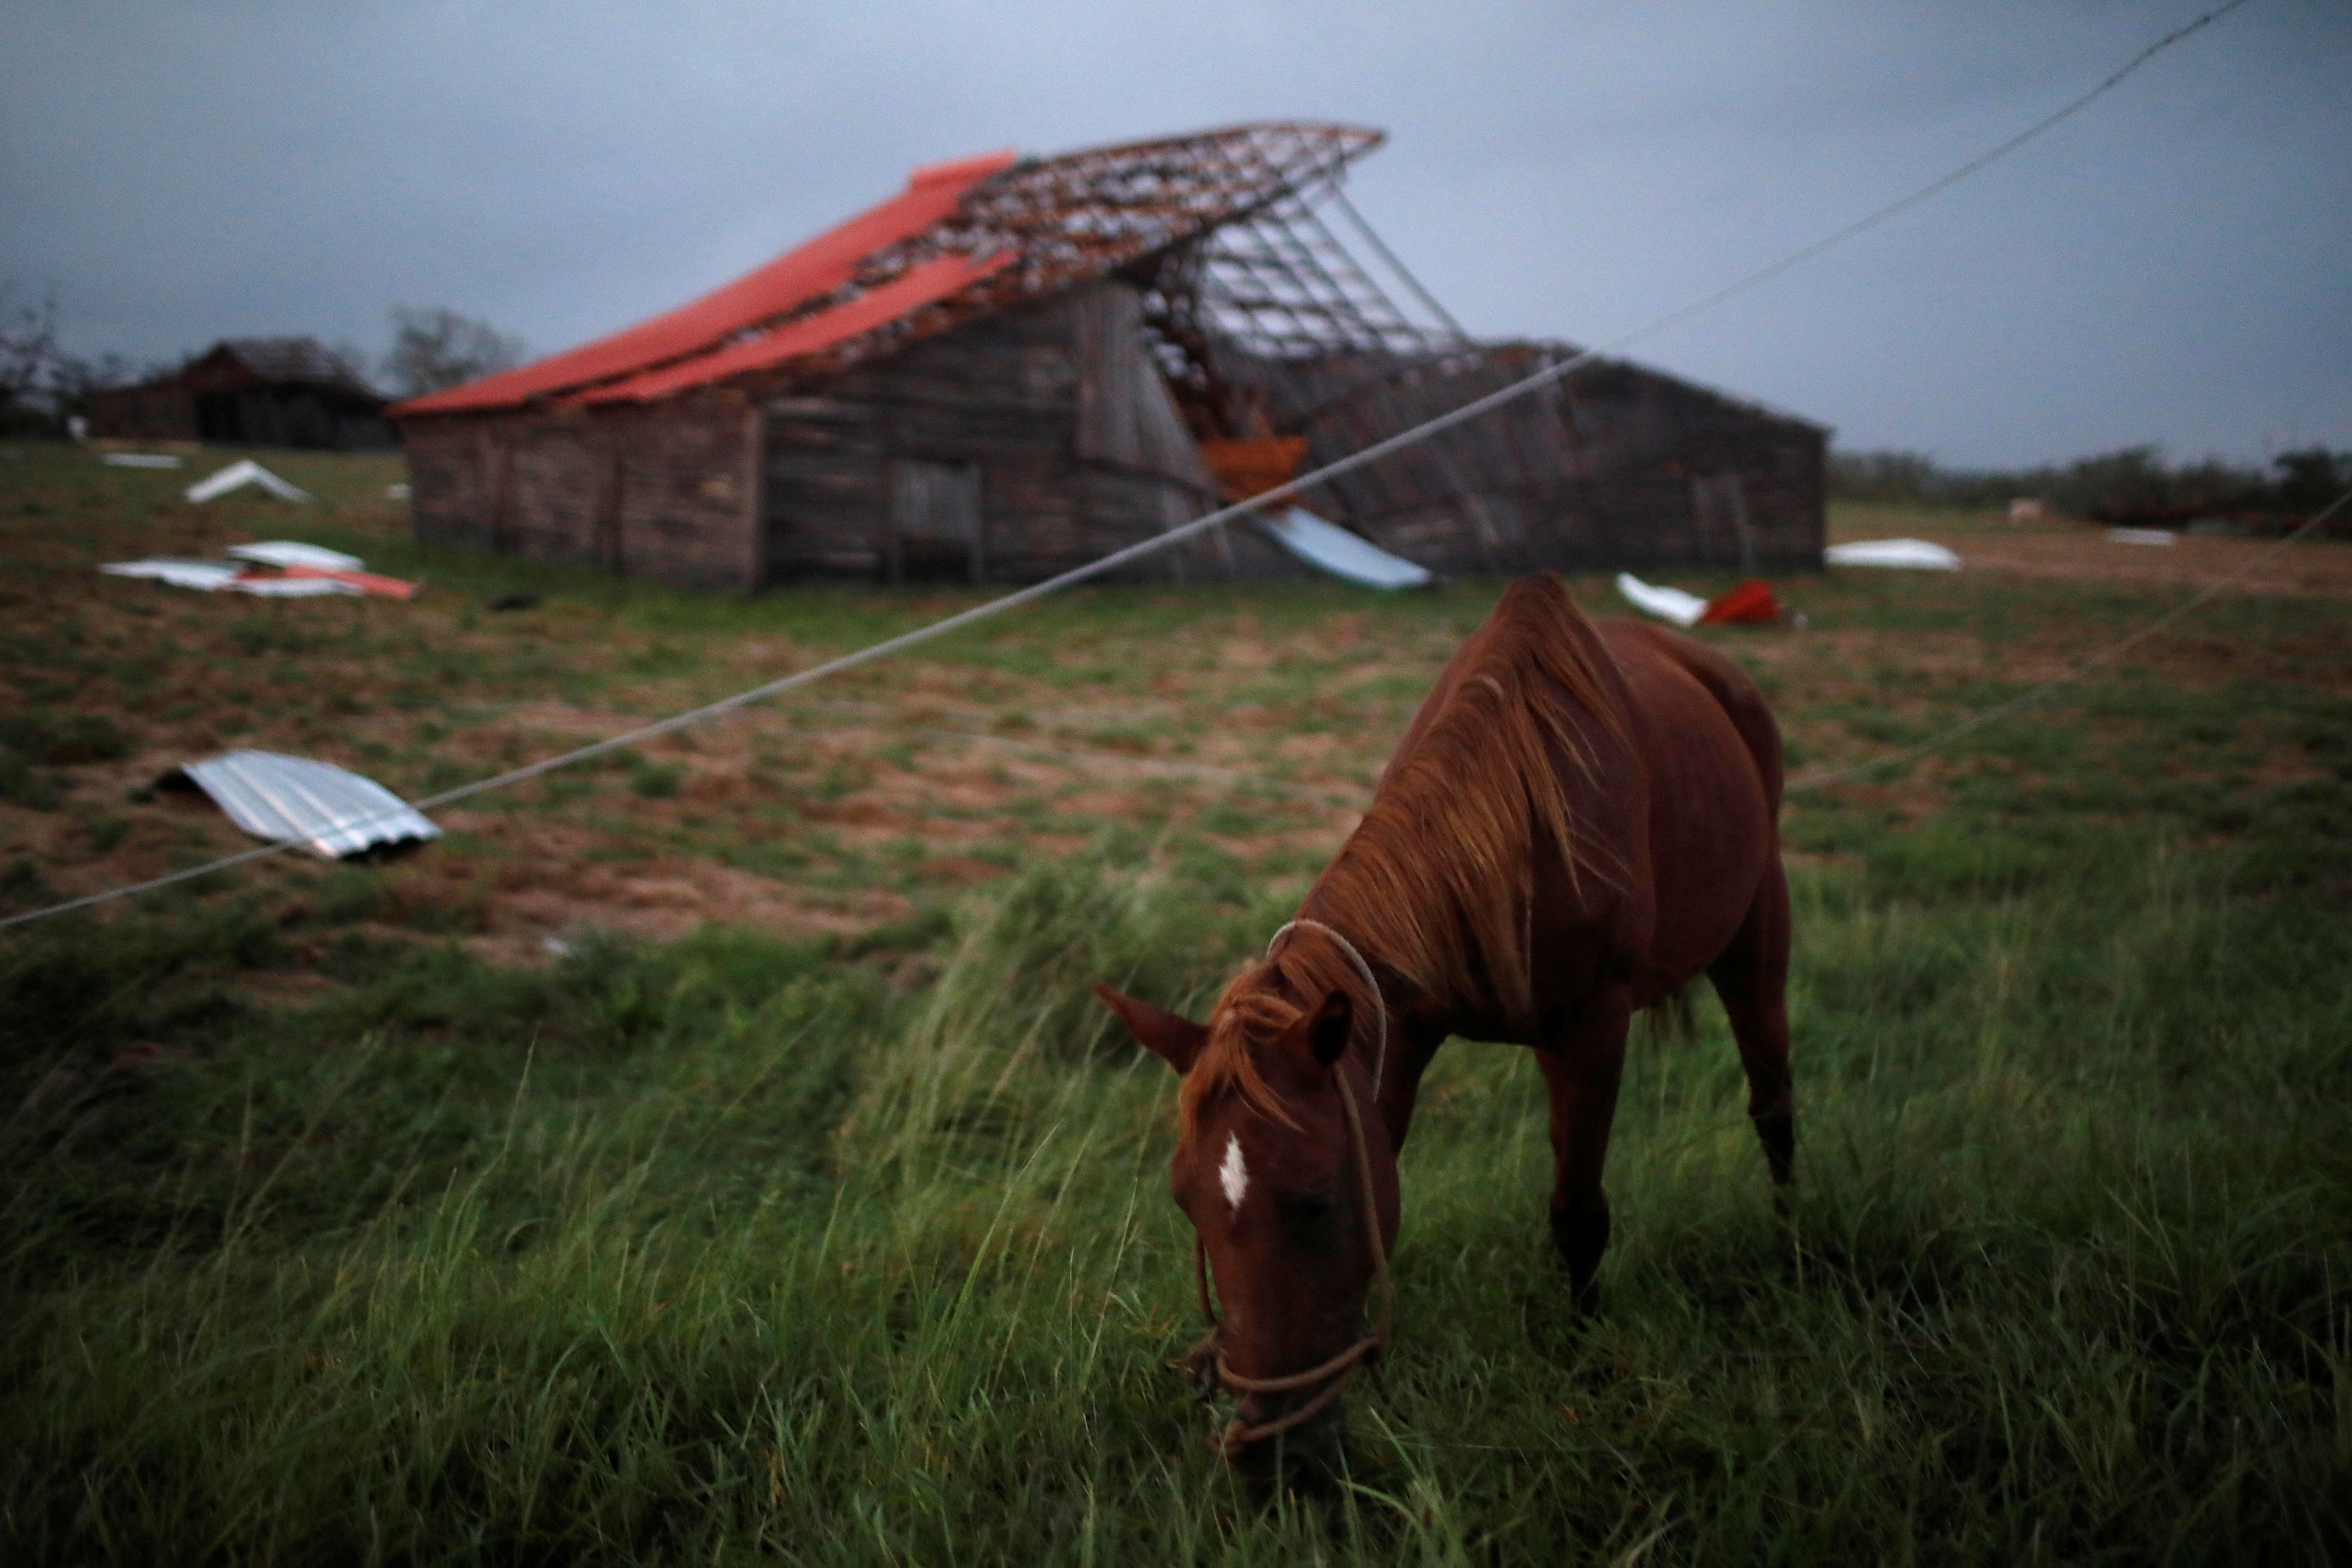 A horse is seen in front of a destroyed house in the aftermath of Hurricane Ian in Puerta de Golpe, Cuba, September 27, 2022. REUTERS/Alexandre Meneghini